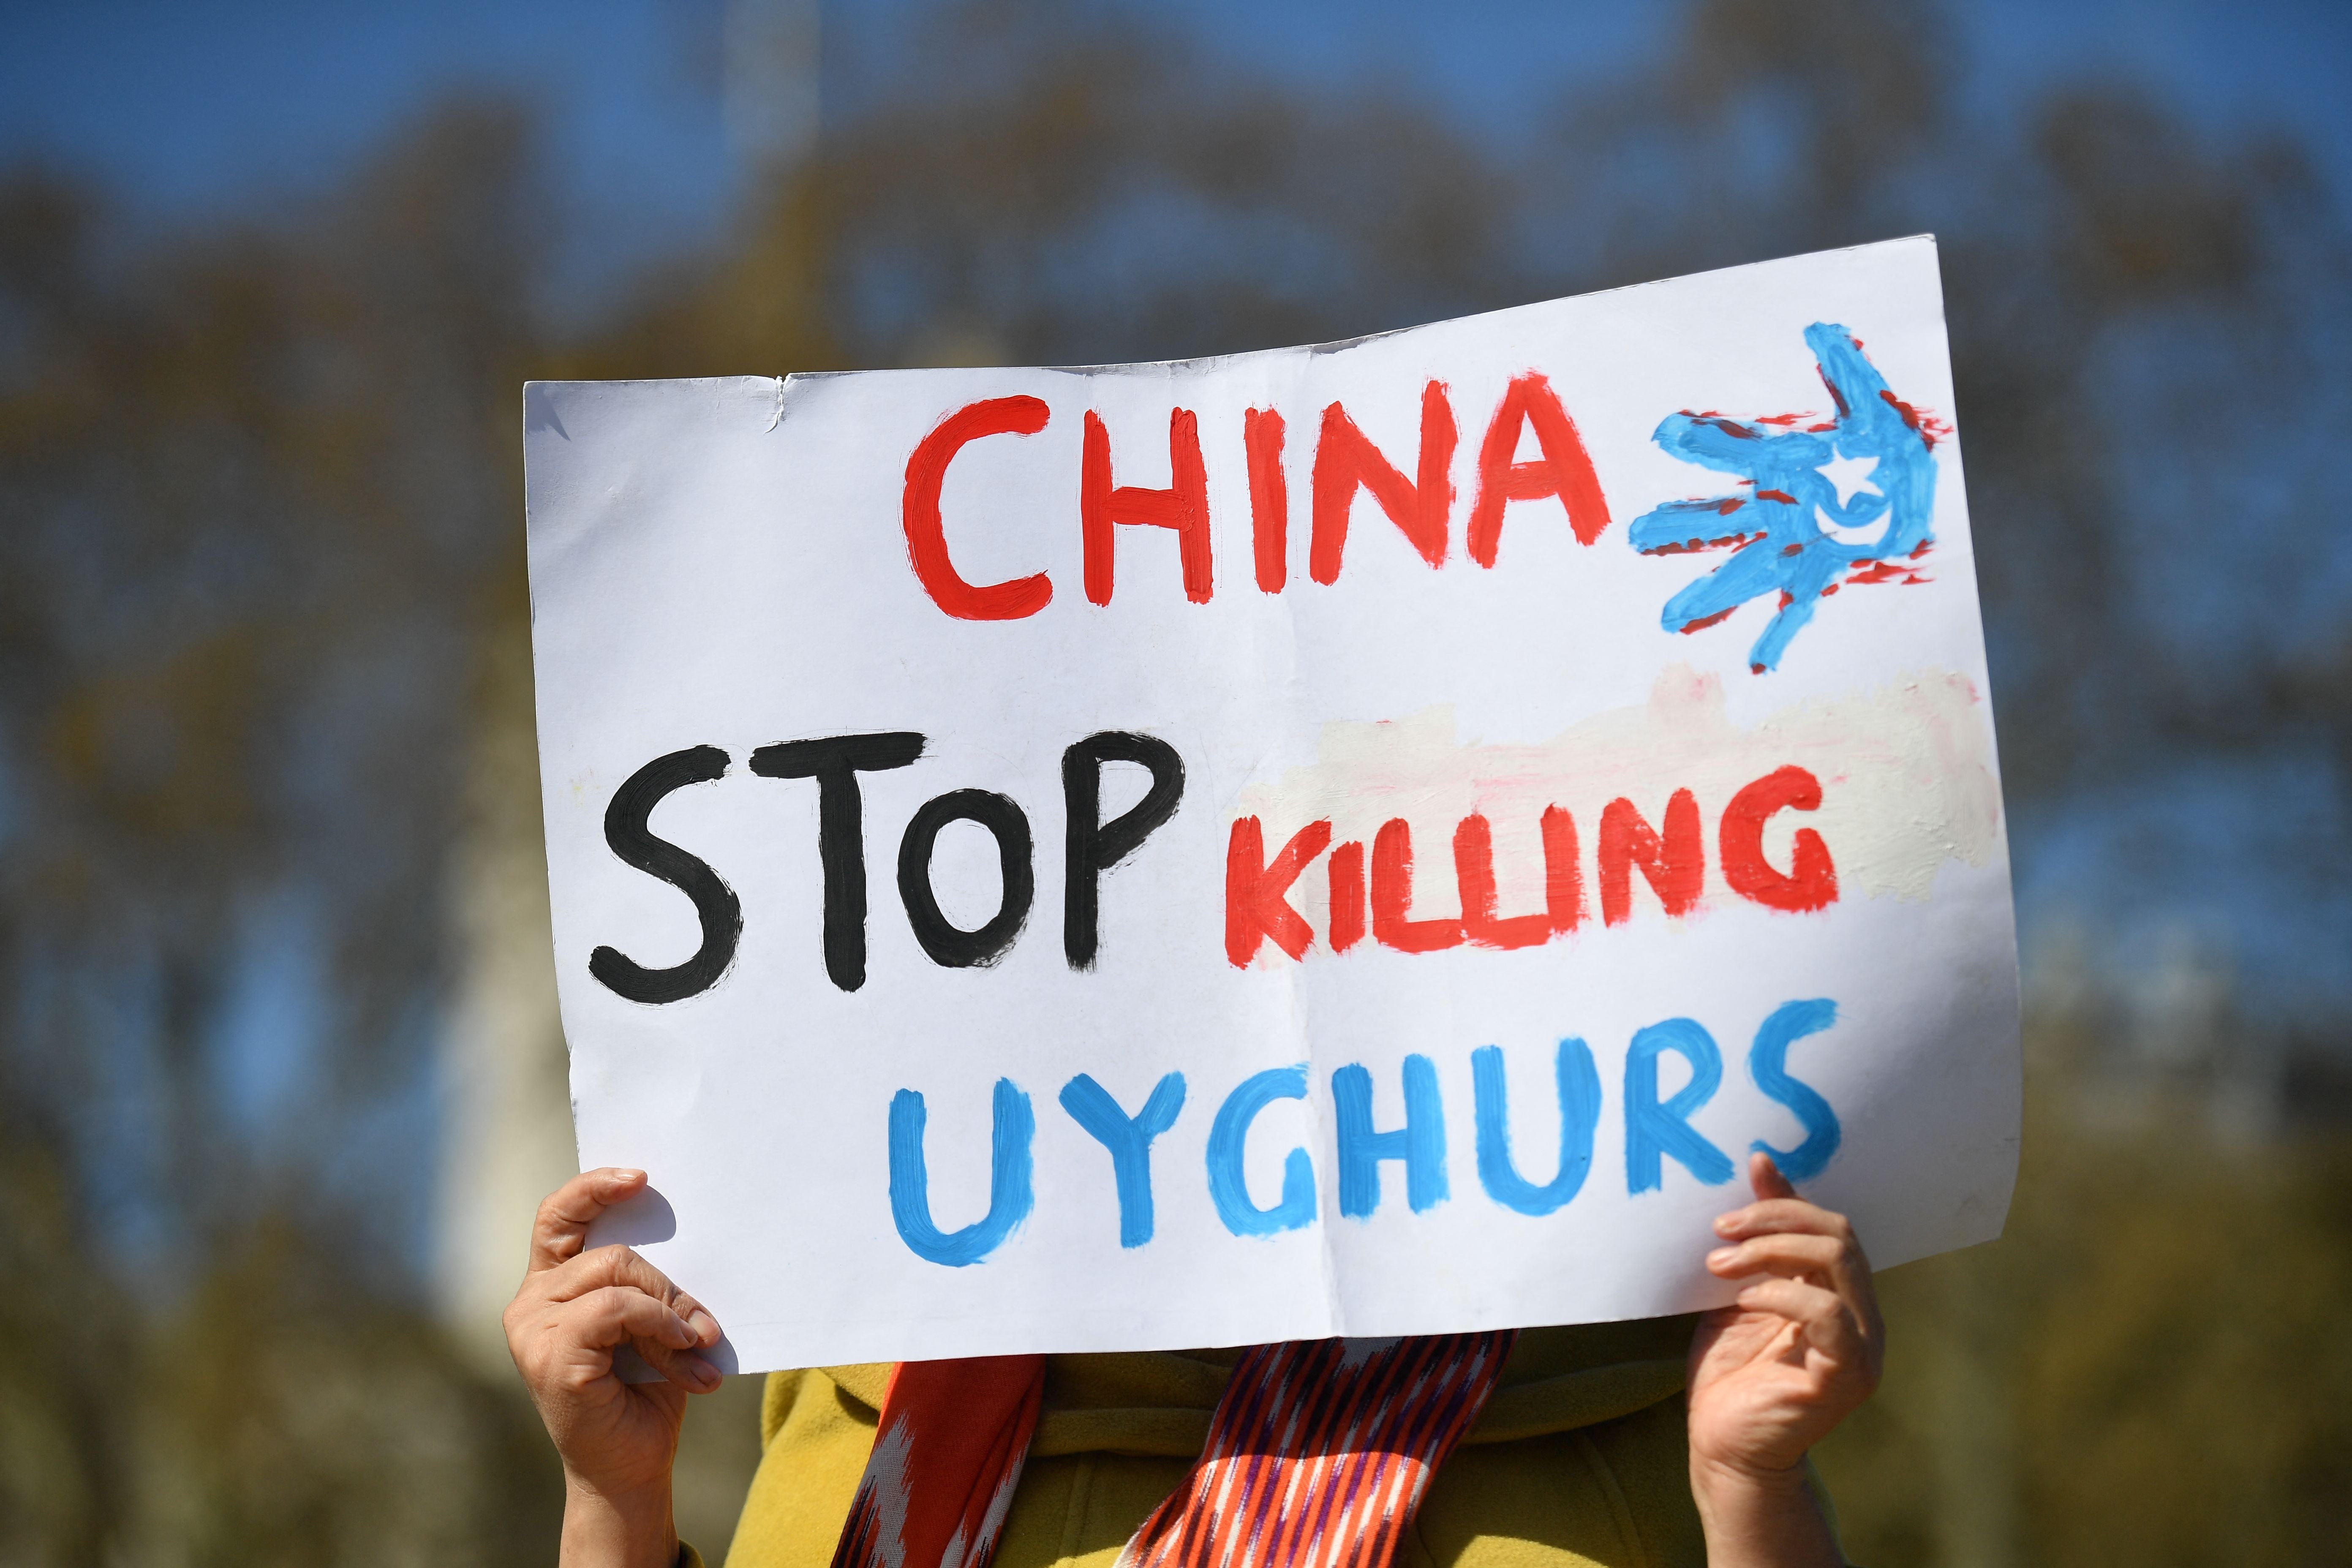 Protests have been held worldwide against China’s “genocide” of Uyghur muslims.